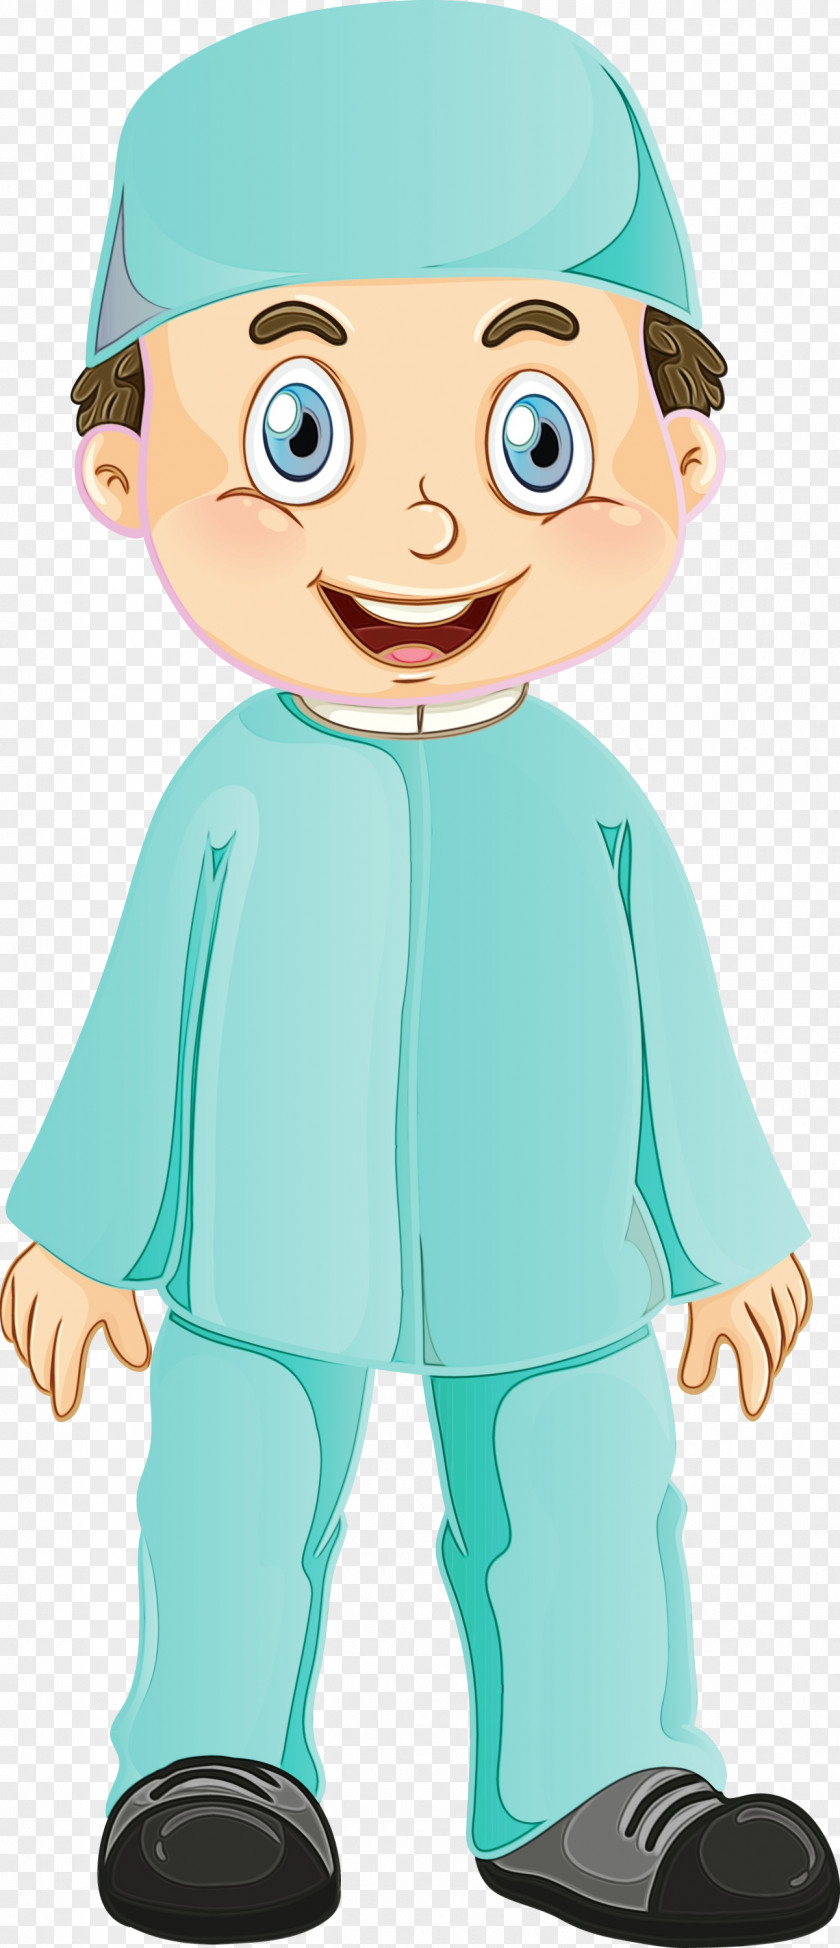 Cartoon Child Physician Toddler Gesture PNG